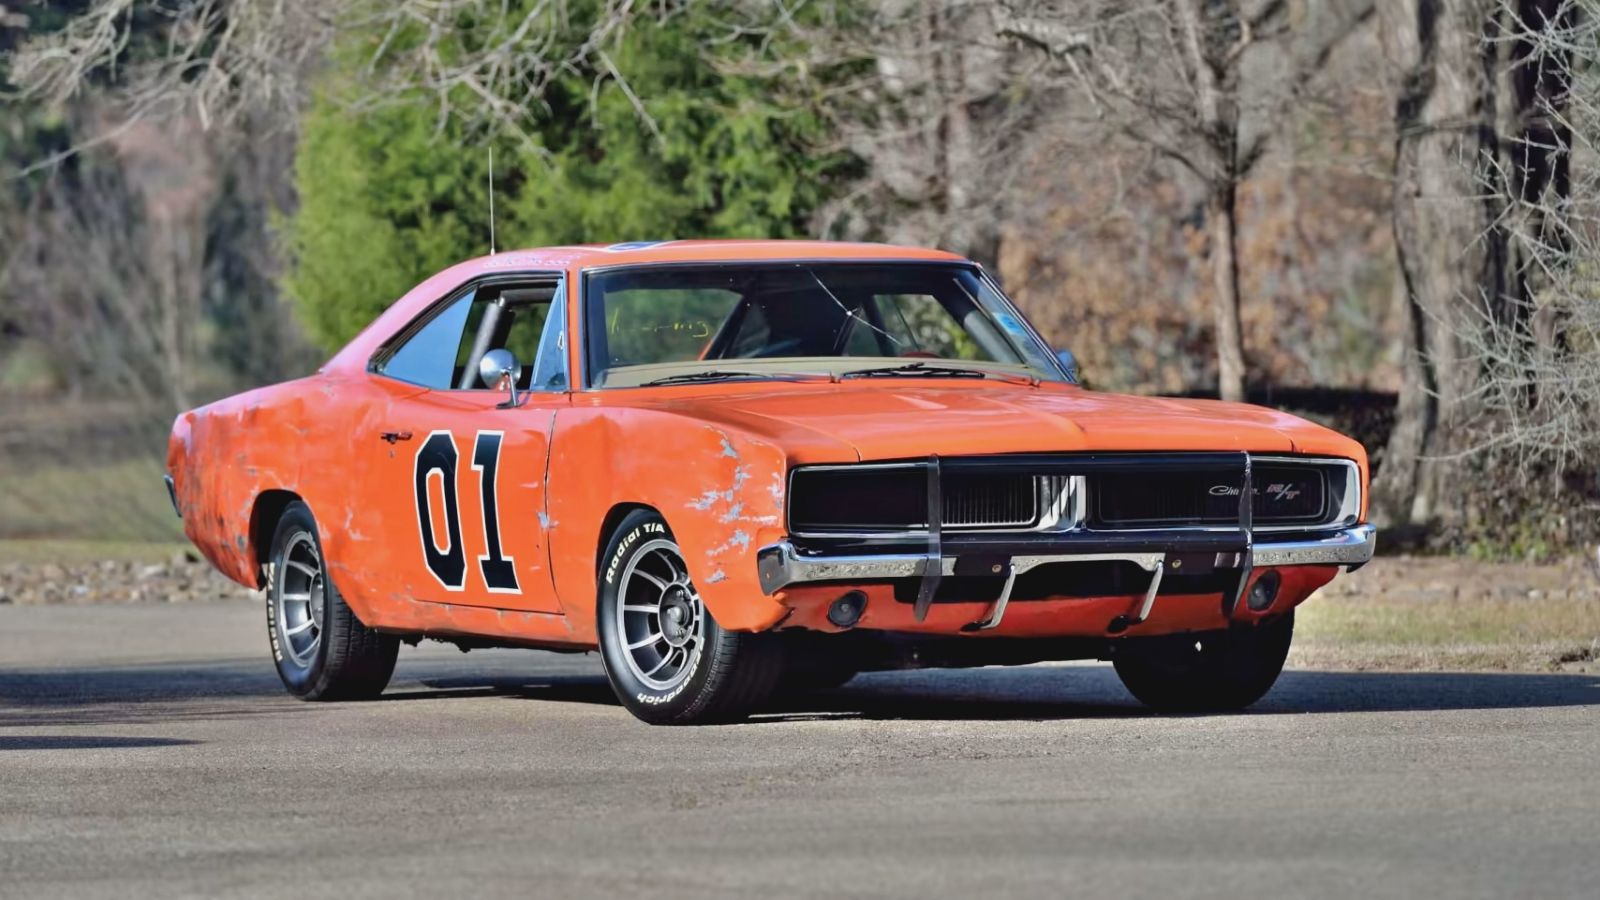 10 Things You Probably Didn’t Know About The Dukes Of Hazzard General Lee